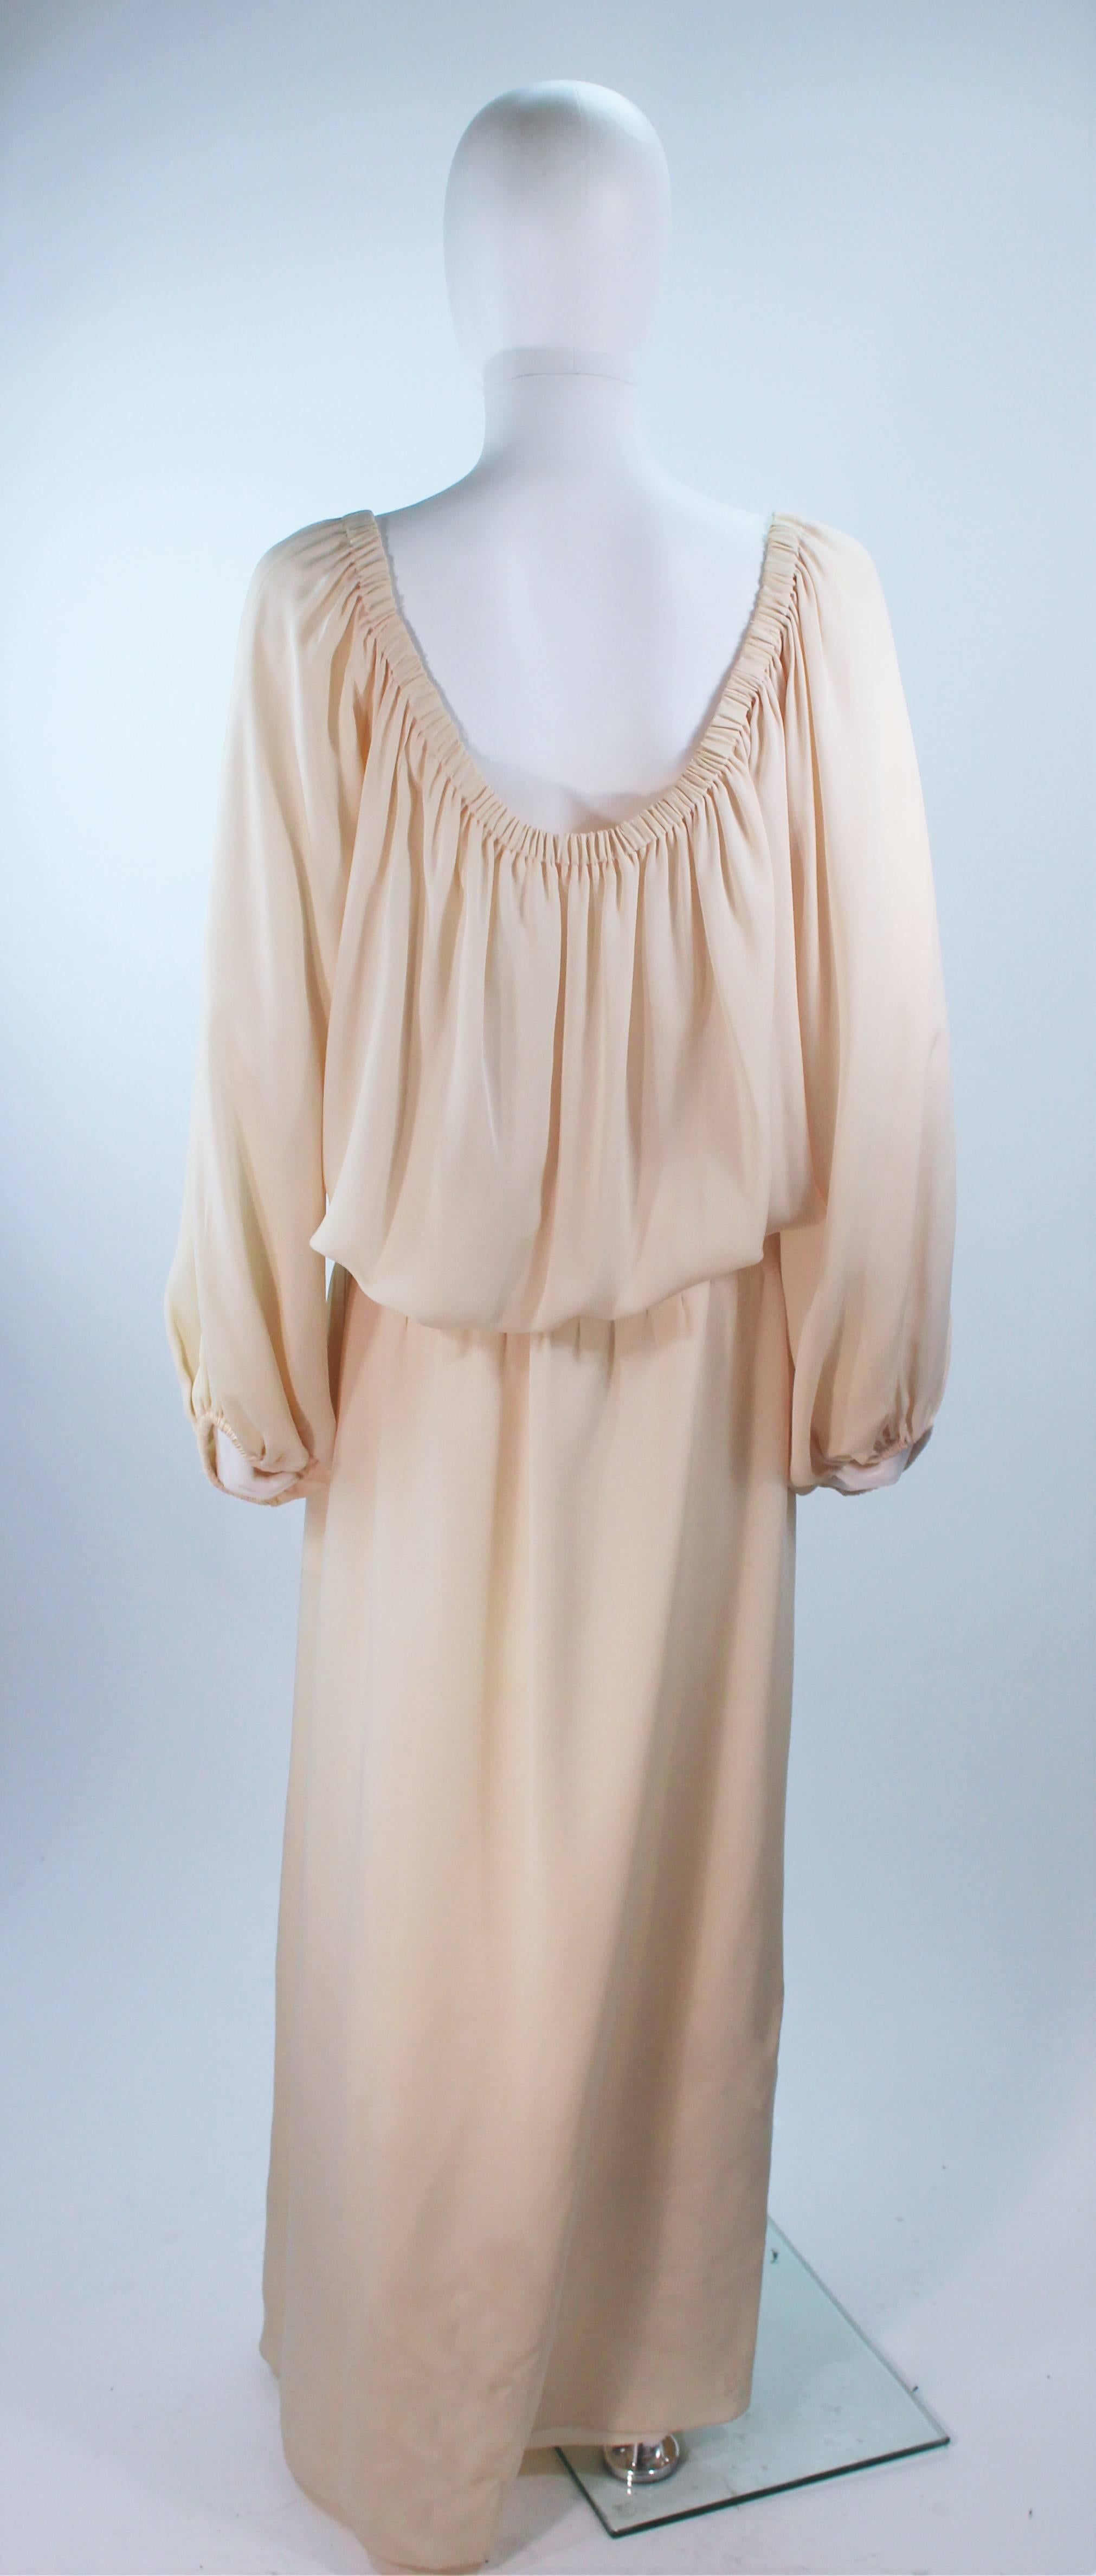 Women's CHRISTIAN DIOR COUTURE Provenance Betsy Bloomingdale Nude Silk Chiffon Gown  For Sale